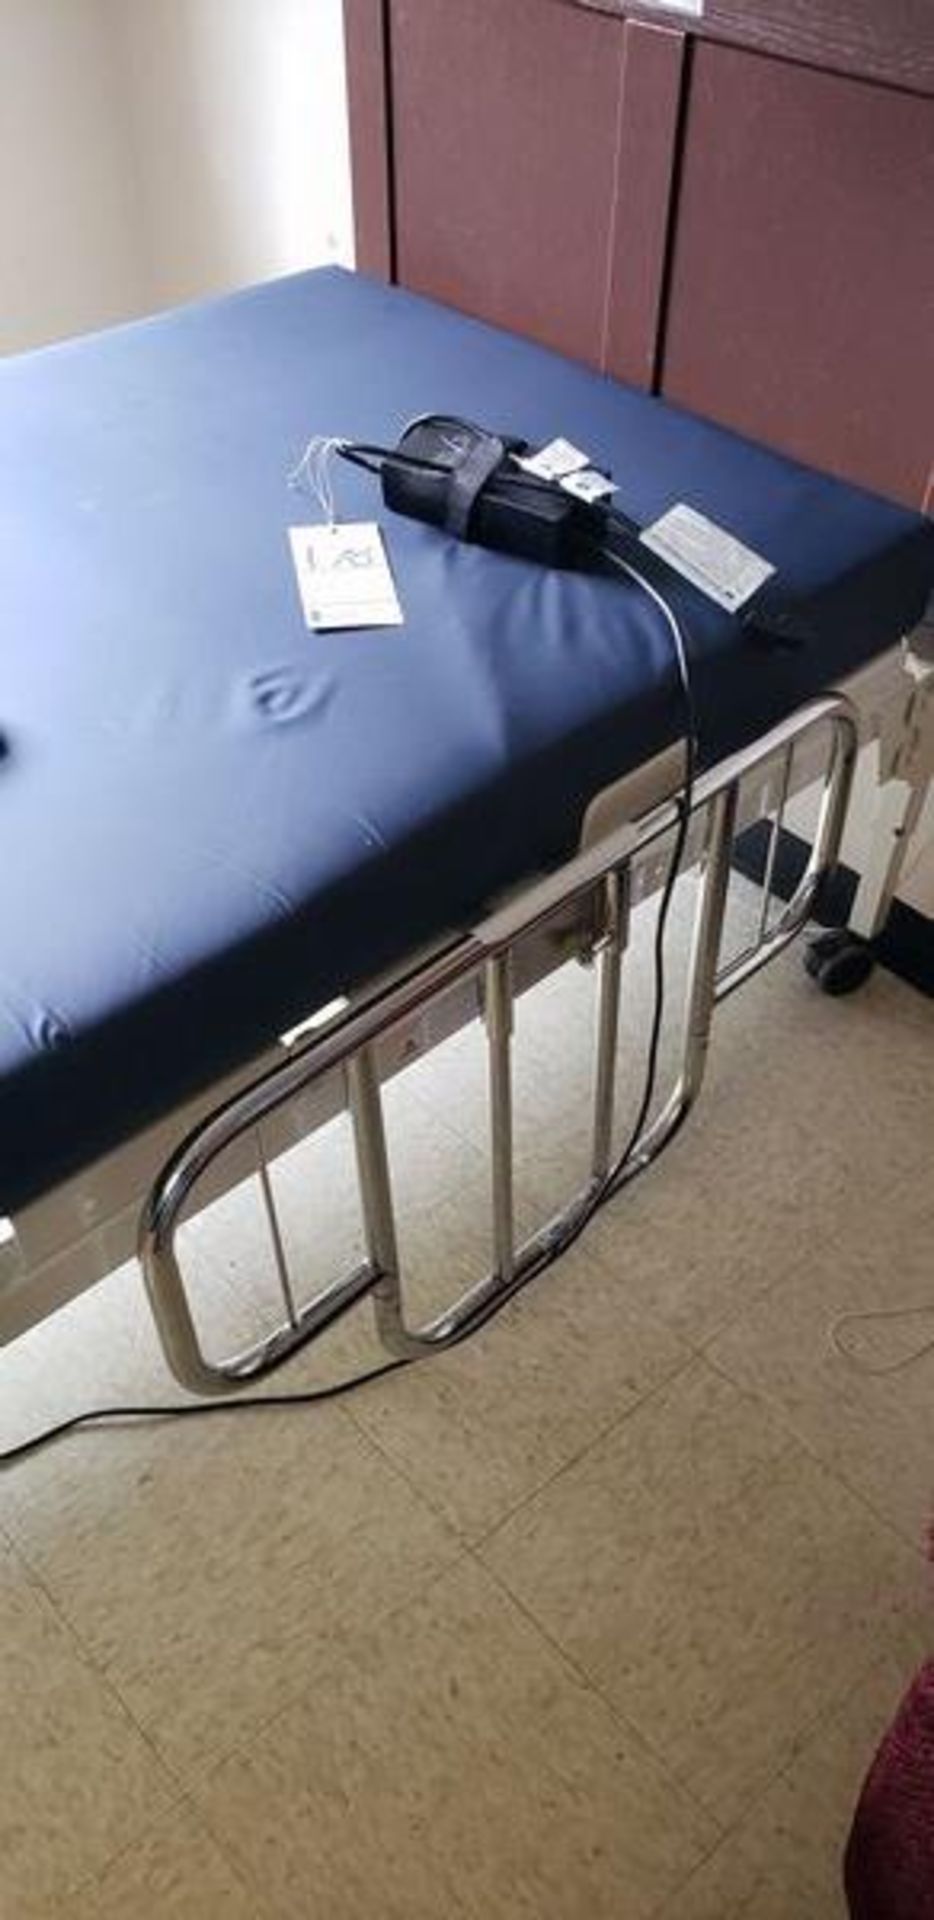 INVACARE G50 HOSPITAL BED - Image 4 of 5